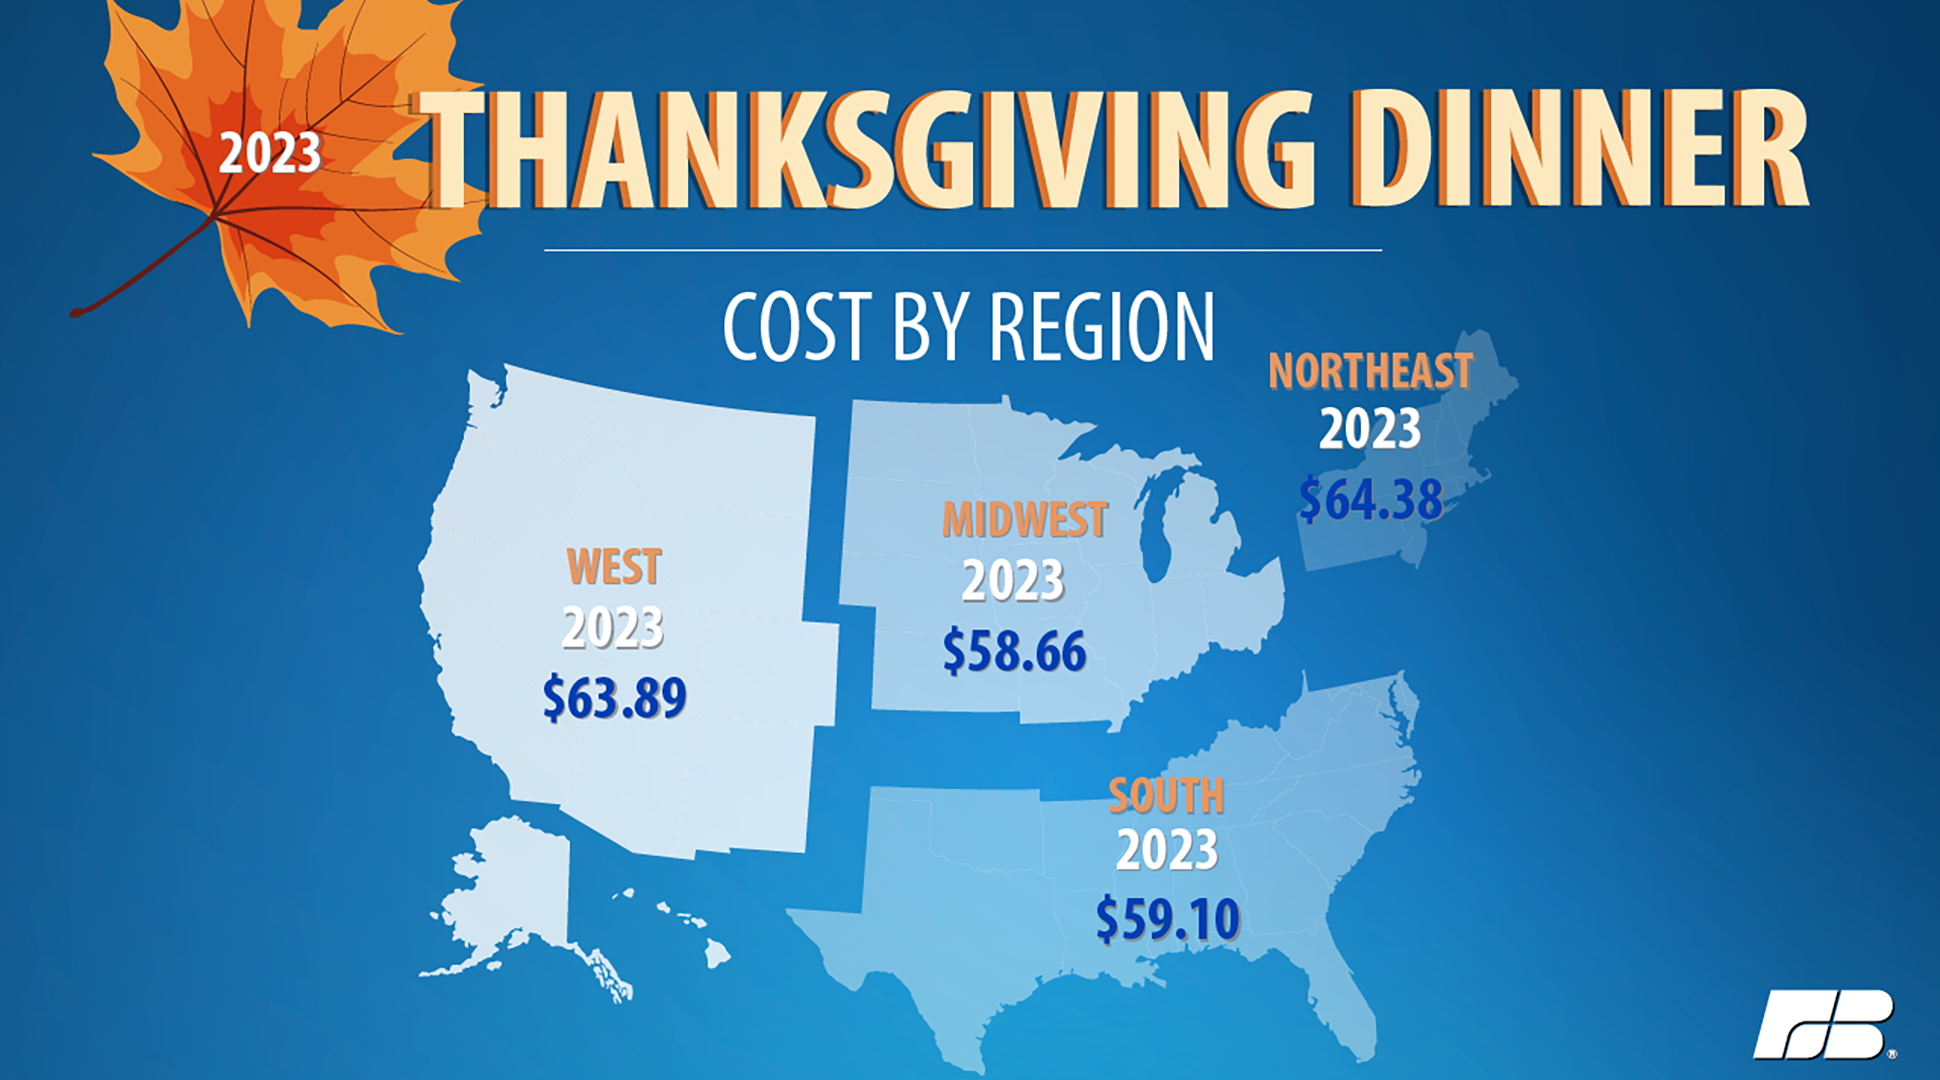 Thanksgiving dinner costs down